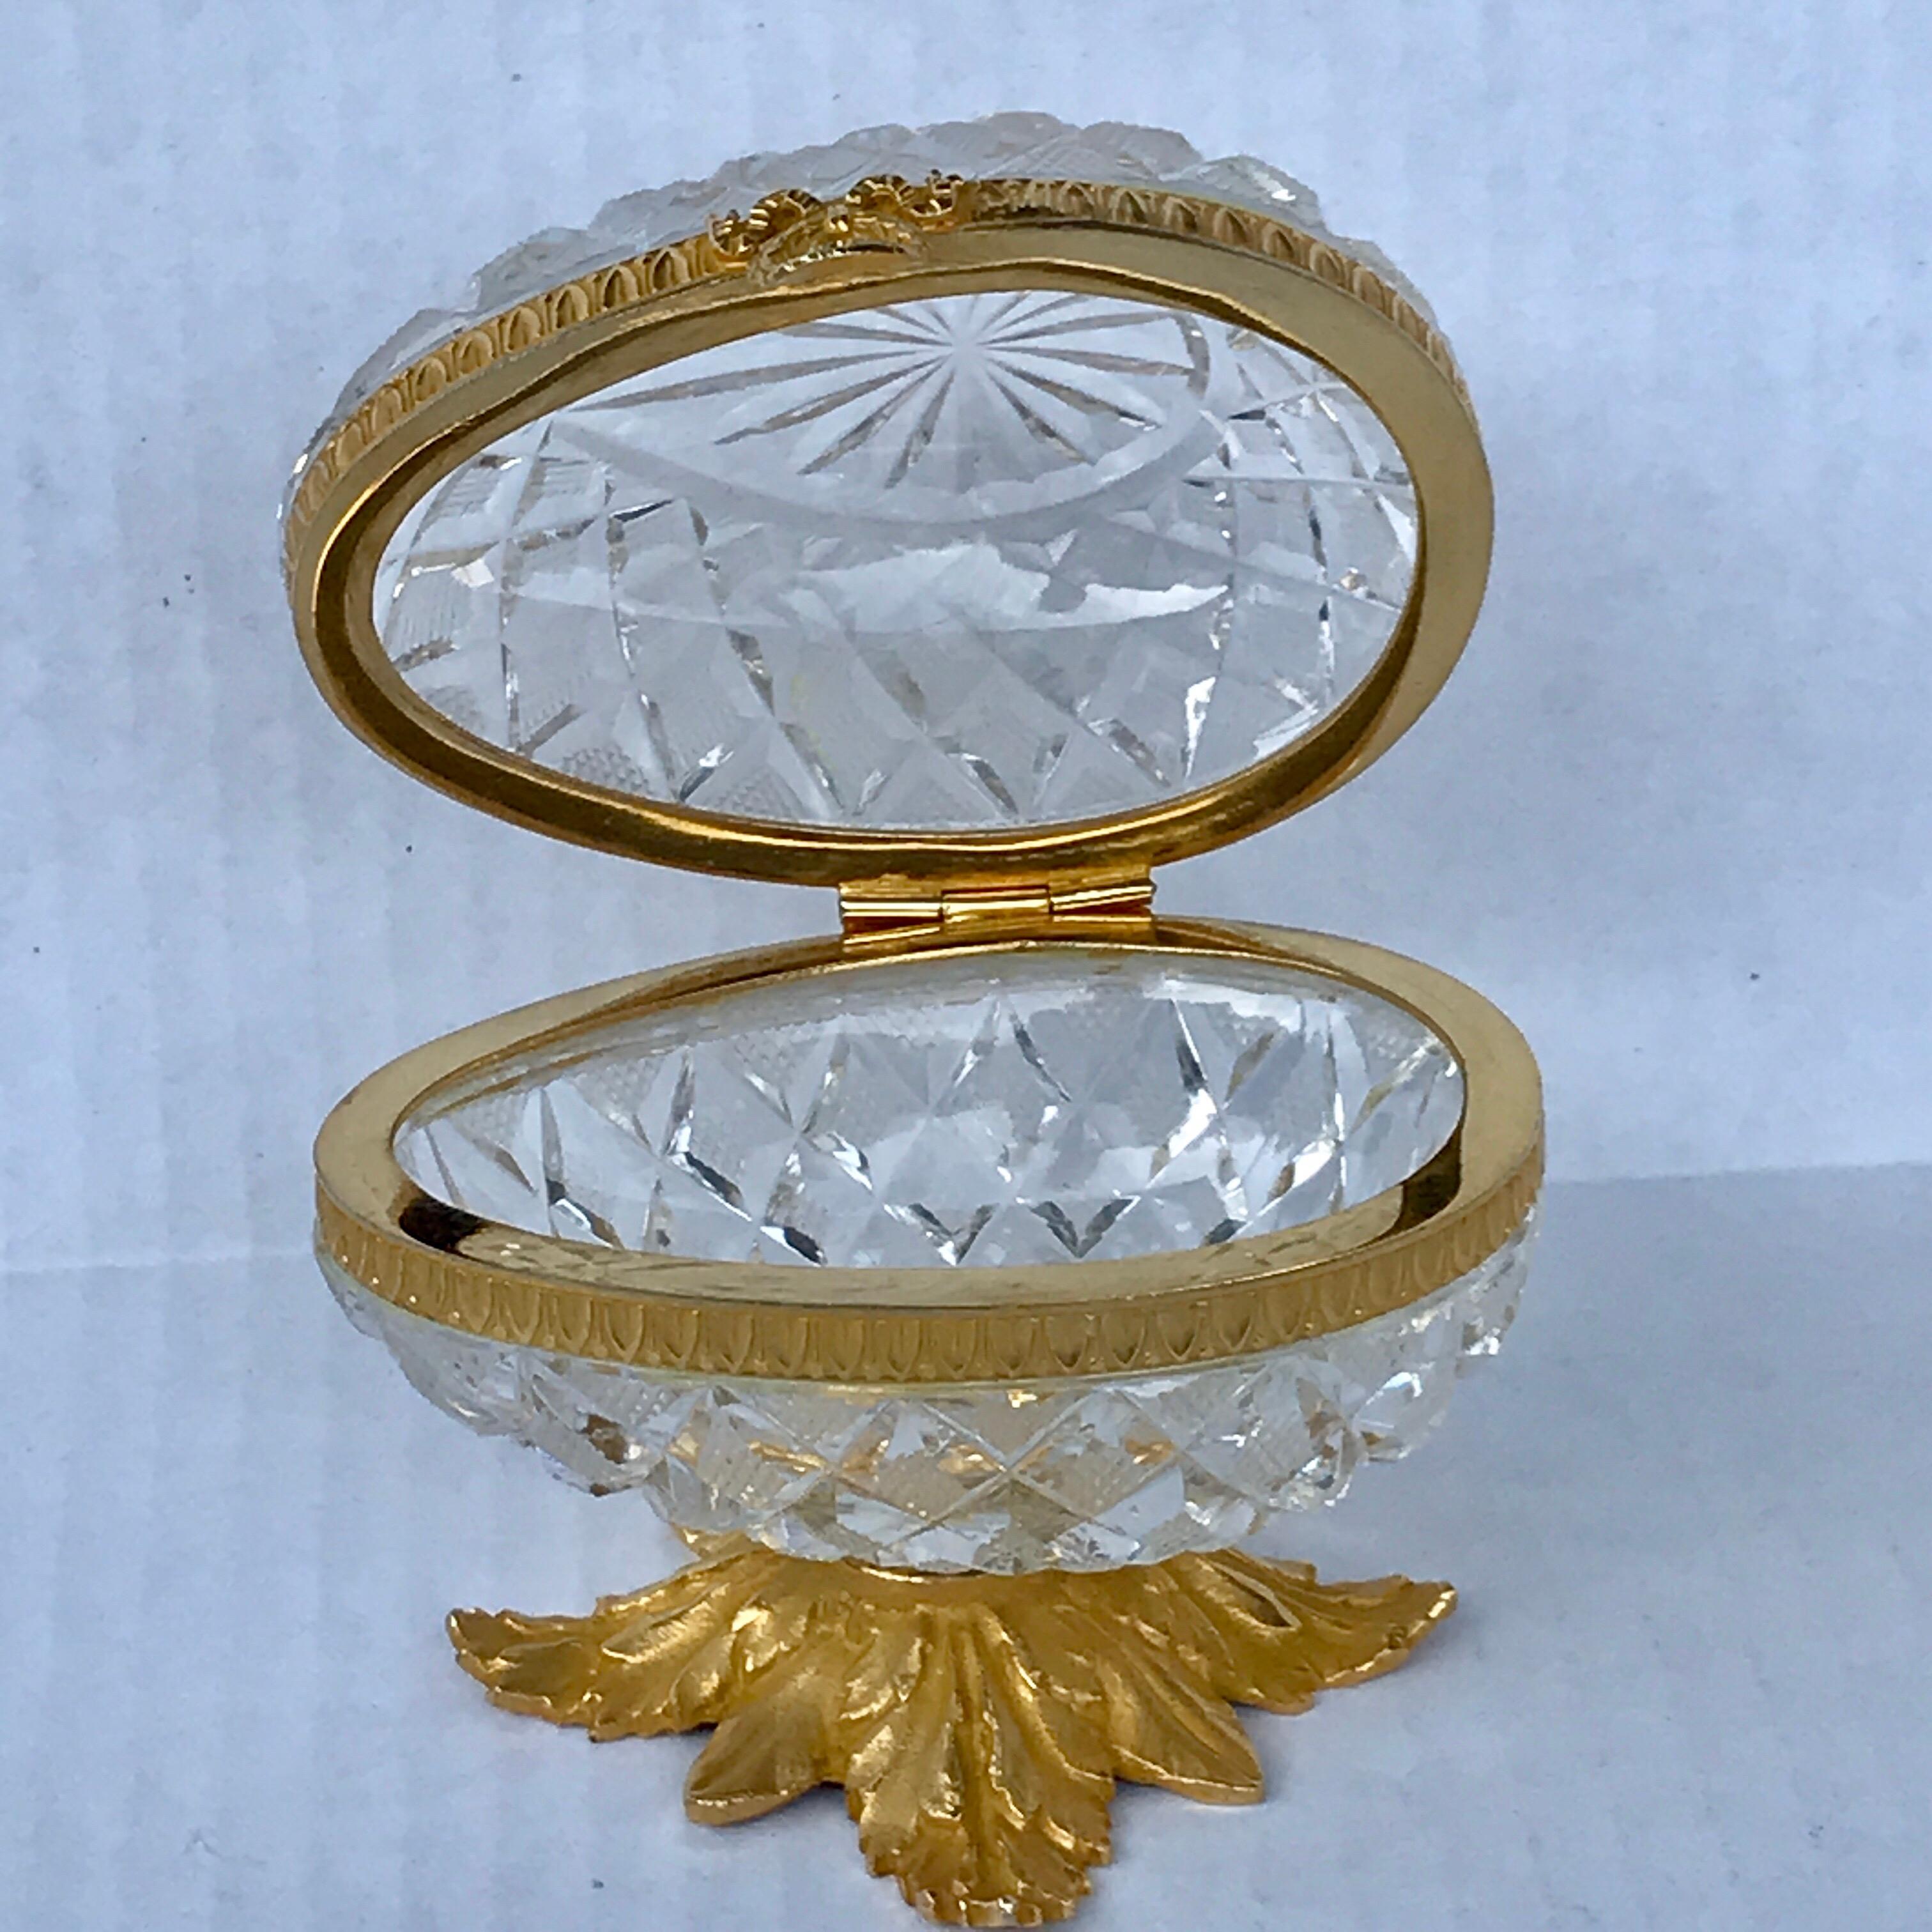 French Cut Glass & Ormolu Mounted Egg Box, in the Manner of Baccarat In Good Condition For Sale In Atlanta, GA